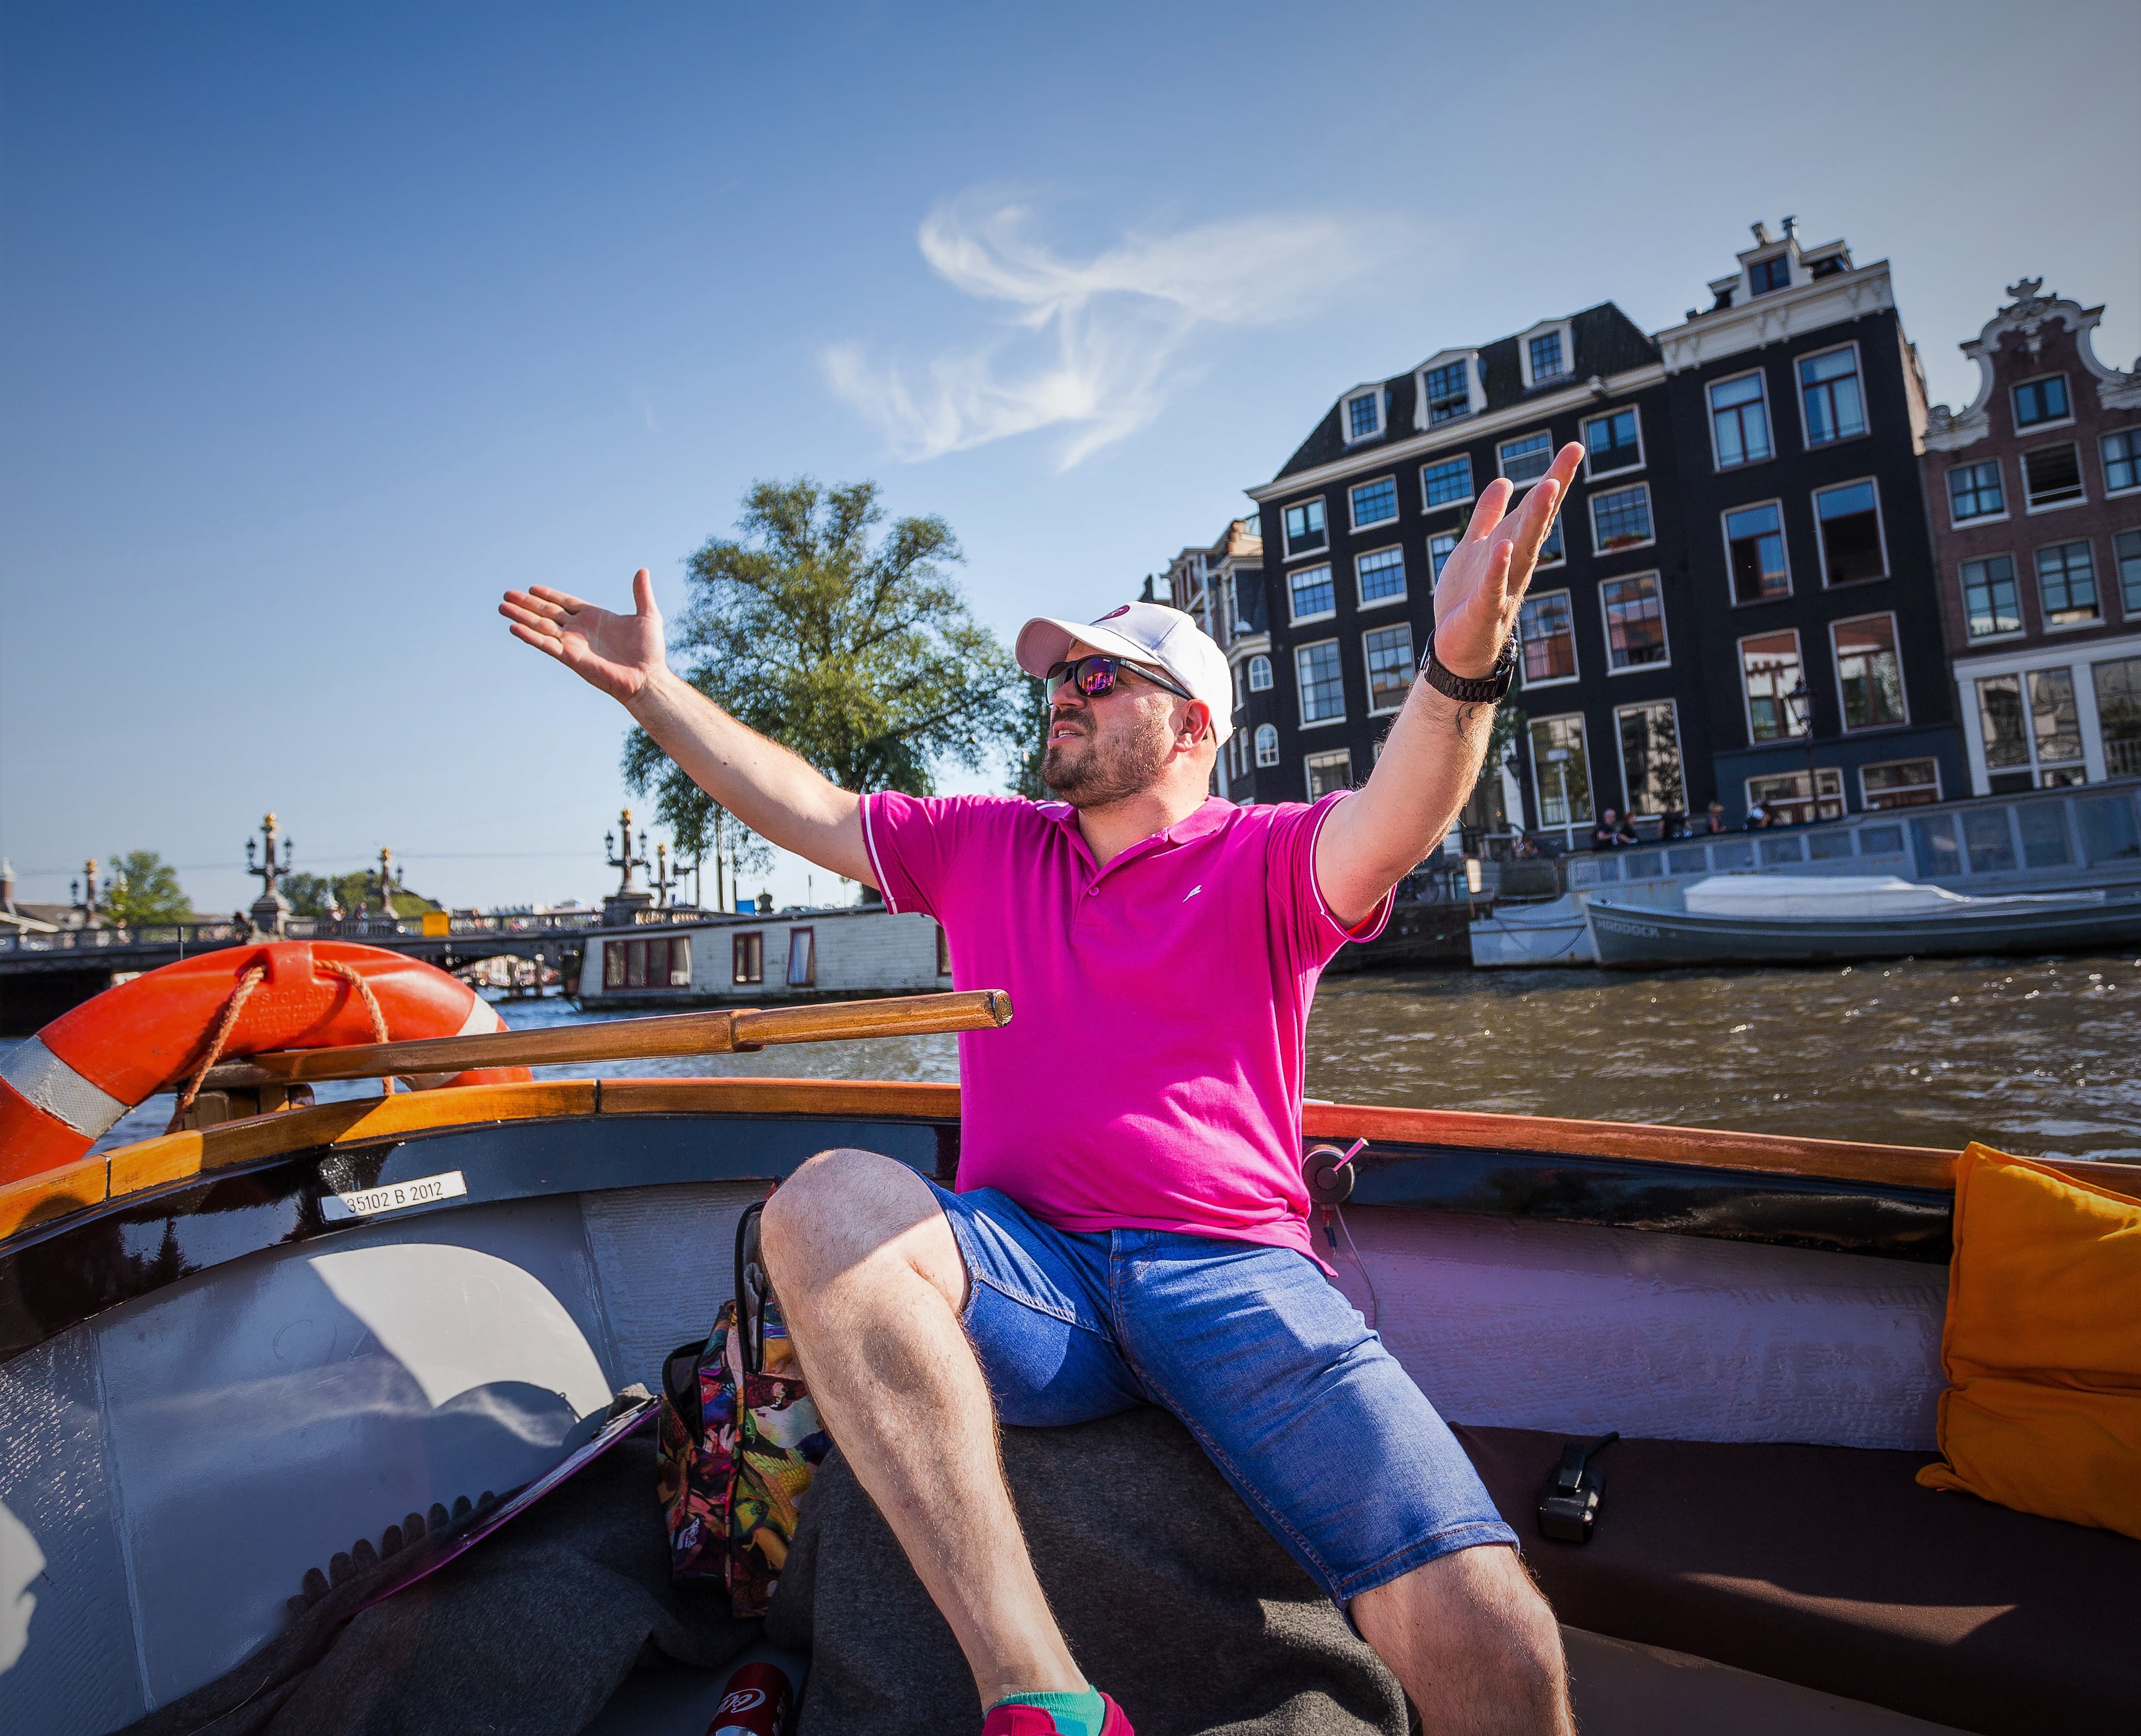 Captain Jack Canal Cruise in Amsterdam